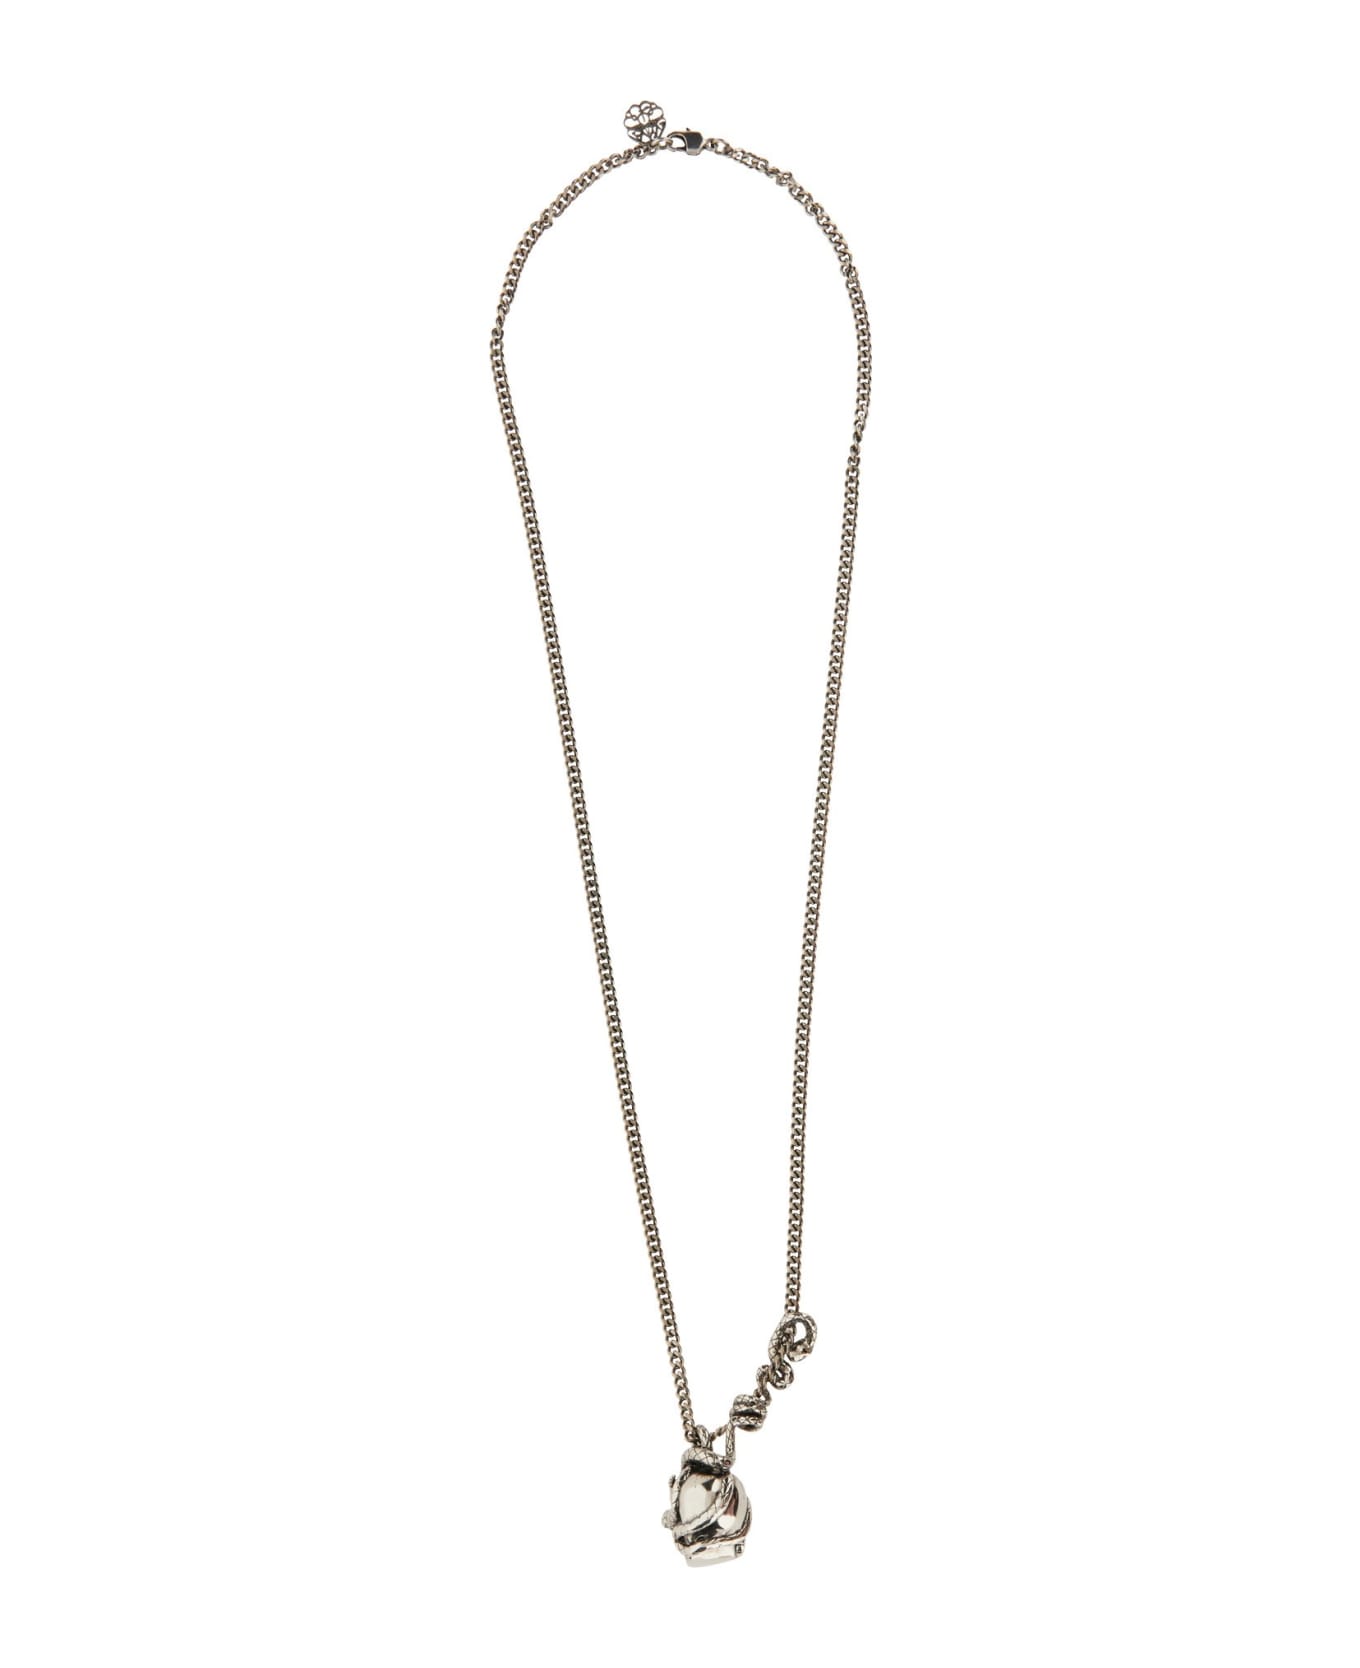 Alexander McQueen Skull And Snake Necklace - Silver ネックレス